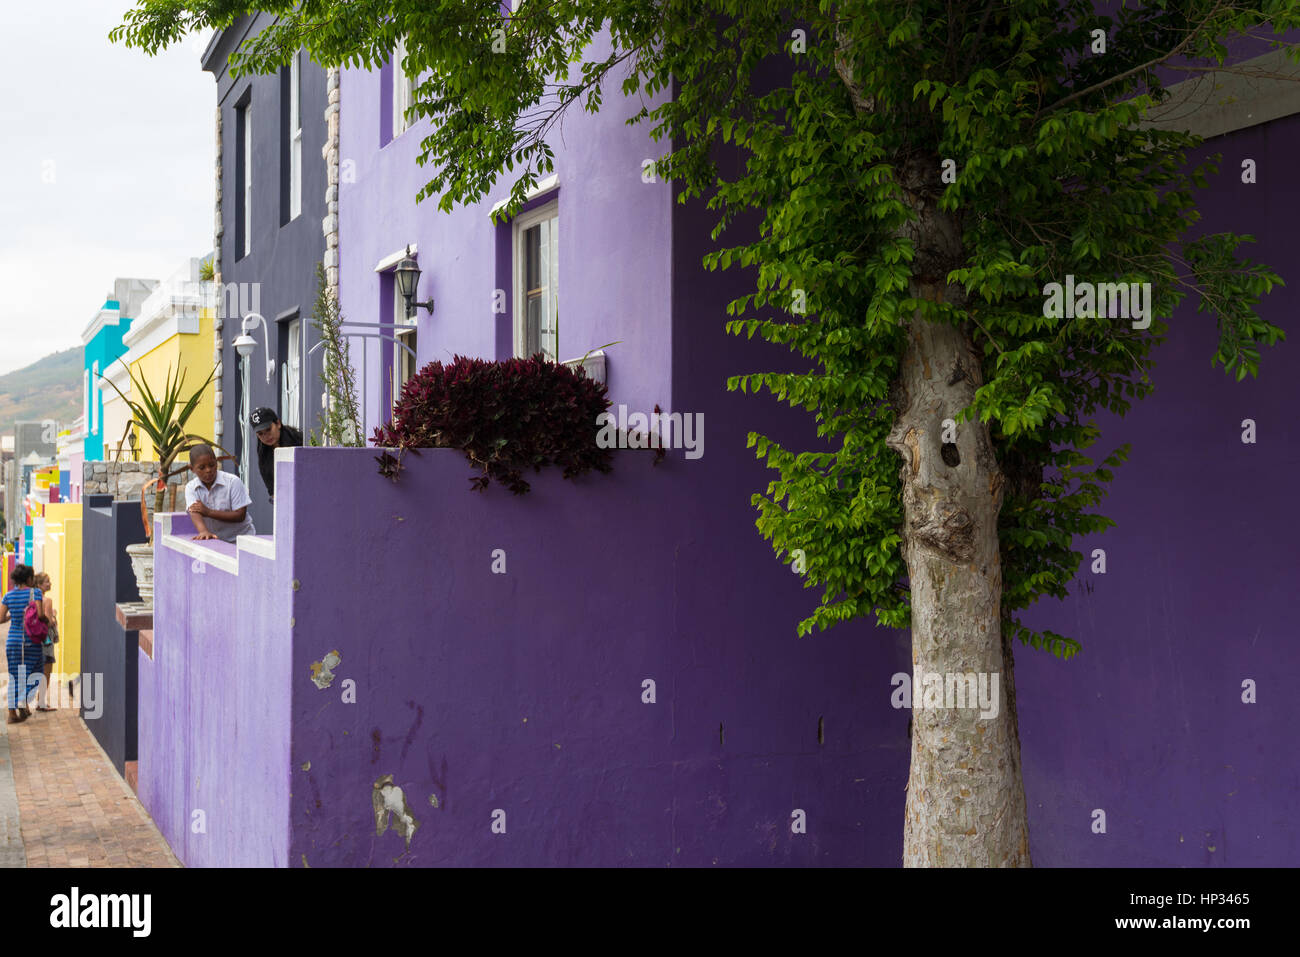 Cape Town, South Africa - November 22, 2016: People in front of the colorful houses of the Bo-Kaap area in Cape Town, South Africa. Stock Photo